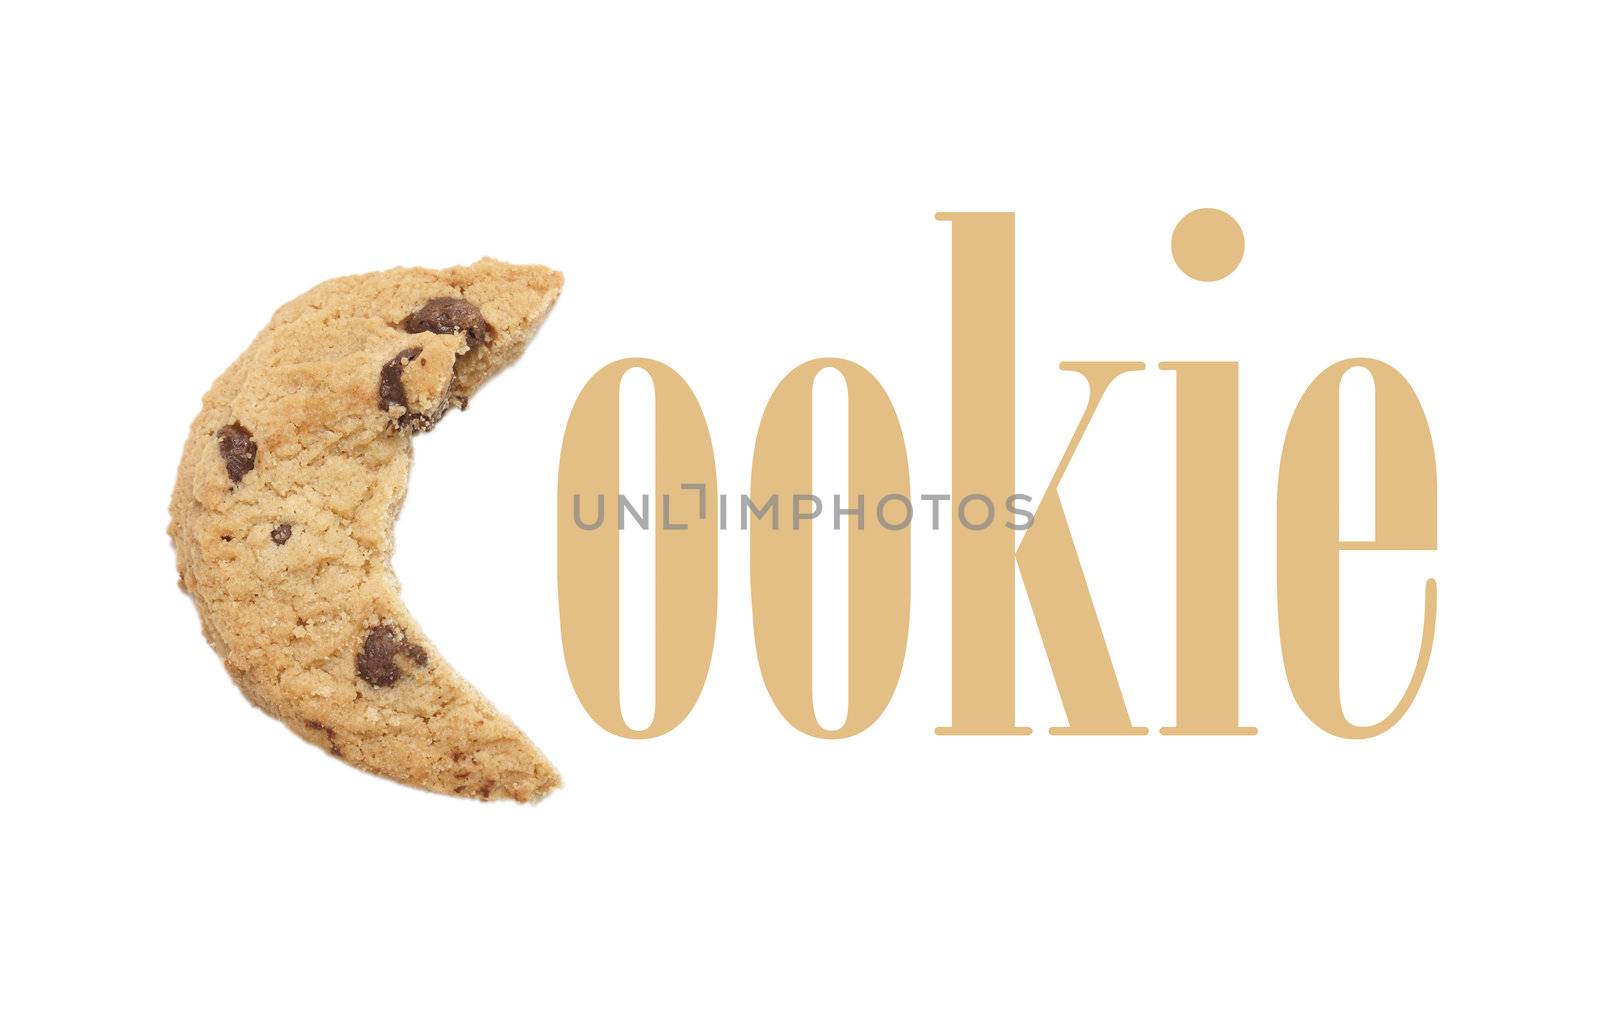 The word cookie with a bitten cookie for the first letter C.